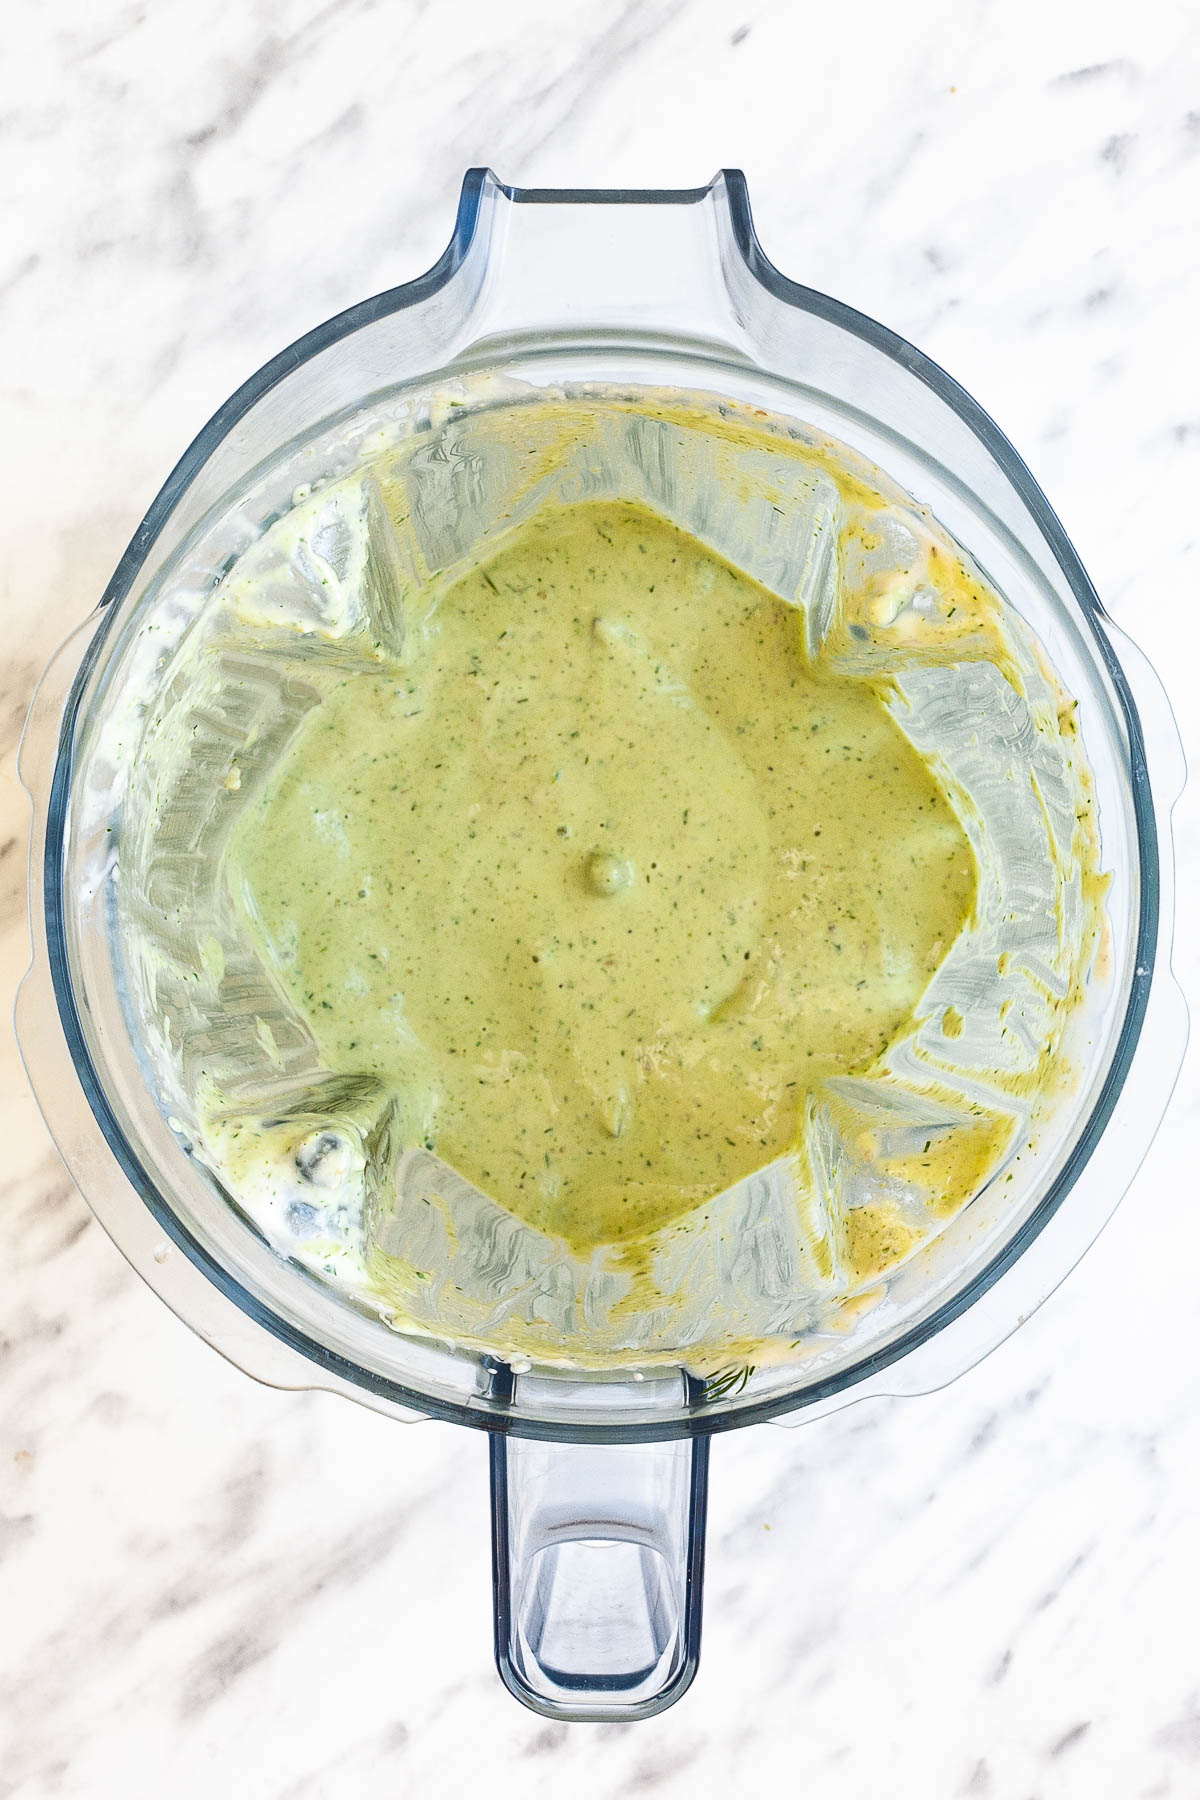 A blender from above with a creamy green sauce.